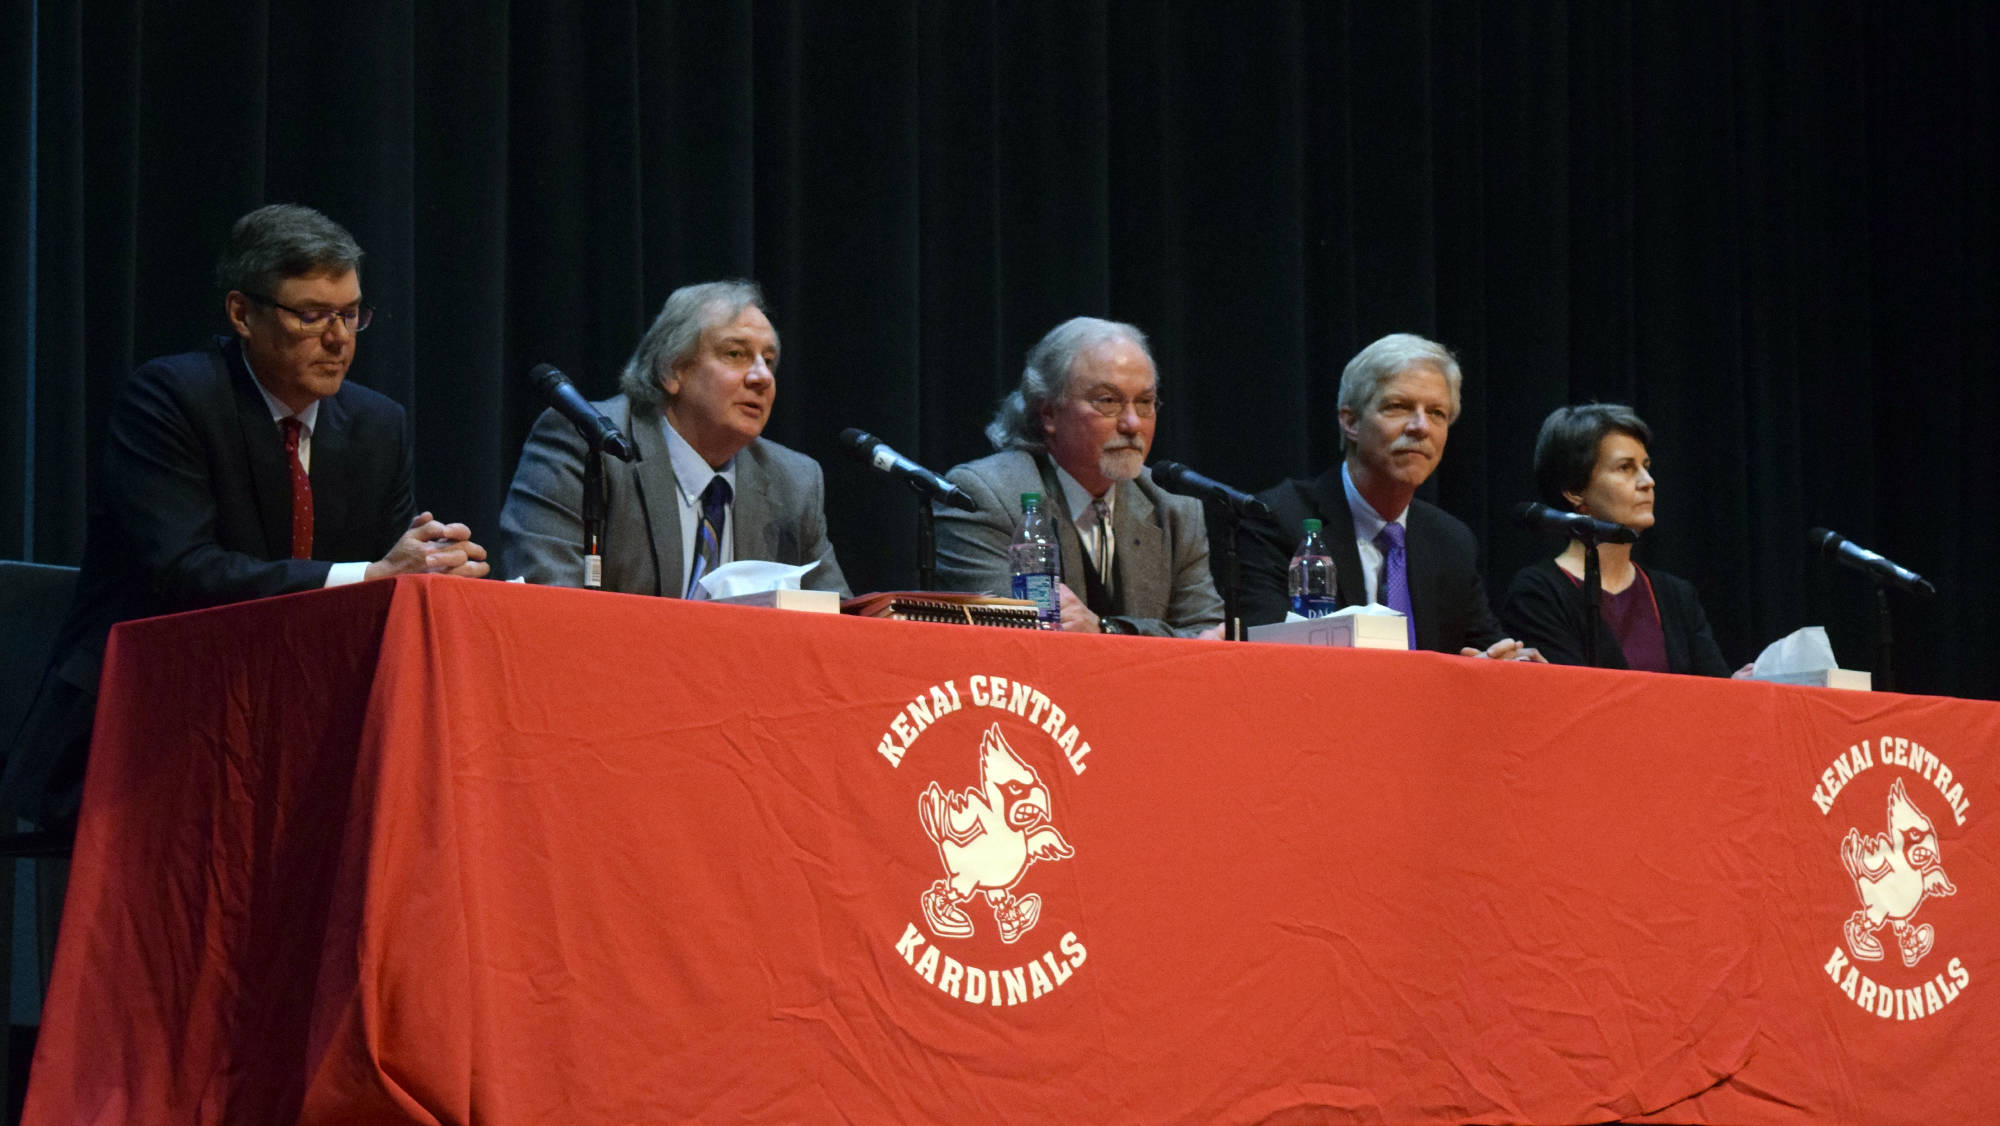 The Alaska Supreme Court fields questions from Kenai Peninsula Borough School District high school students during the Supreme Court Live event on Thursday at Kenai Central High School. (Photo by Kat Sorensen/Peninsula Clarion)